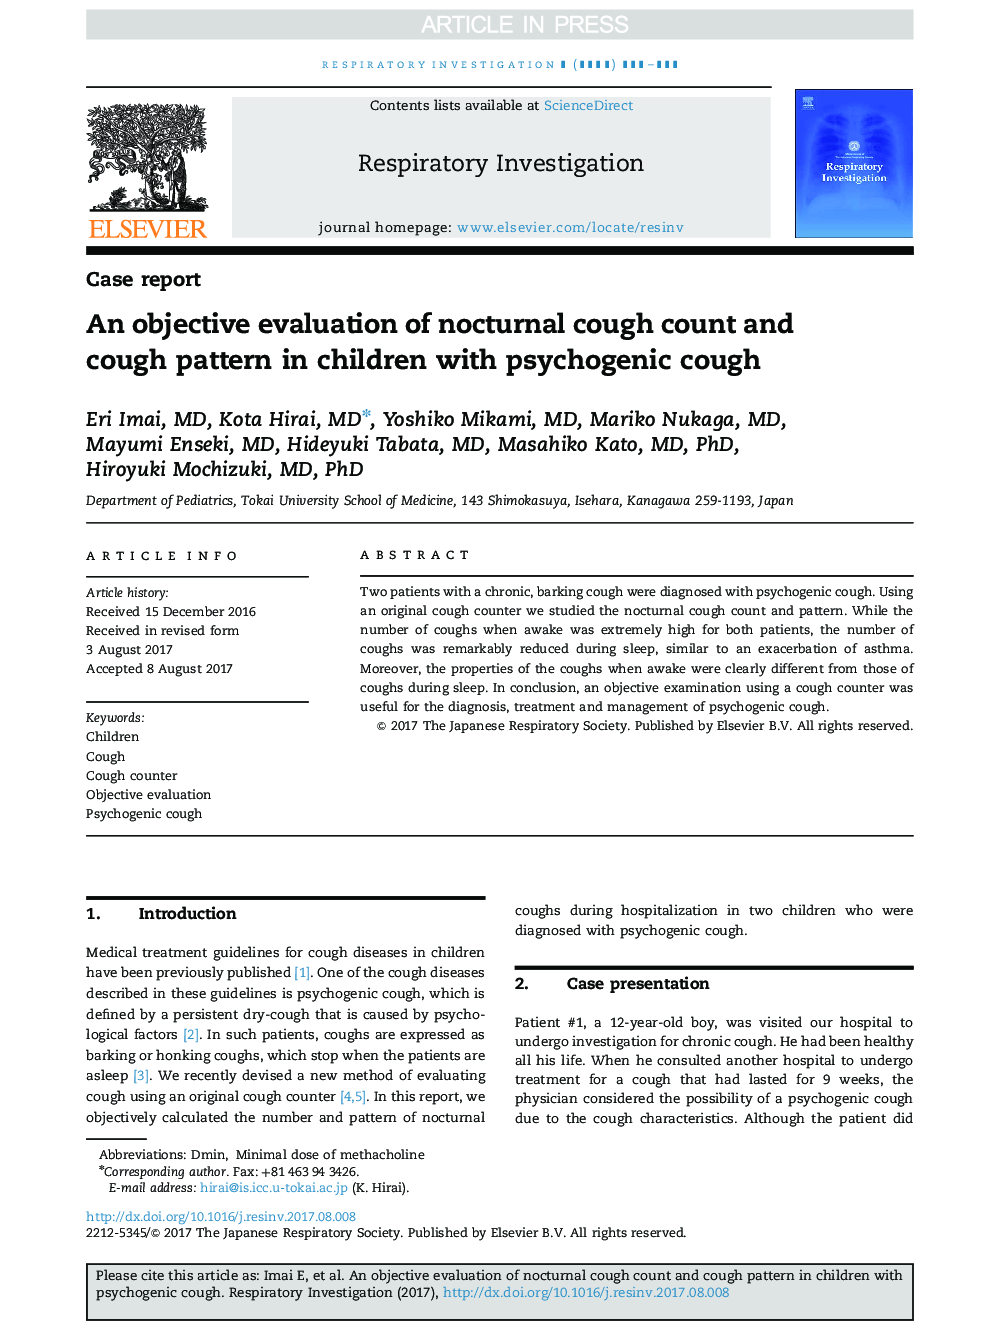 An objective evaluation of nocturnal cough count and cough pattern in children with psychogenic cough